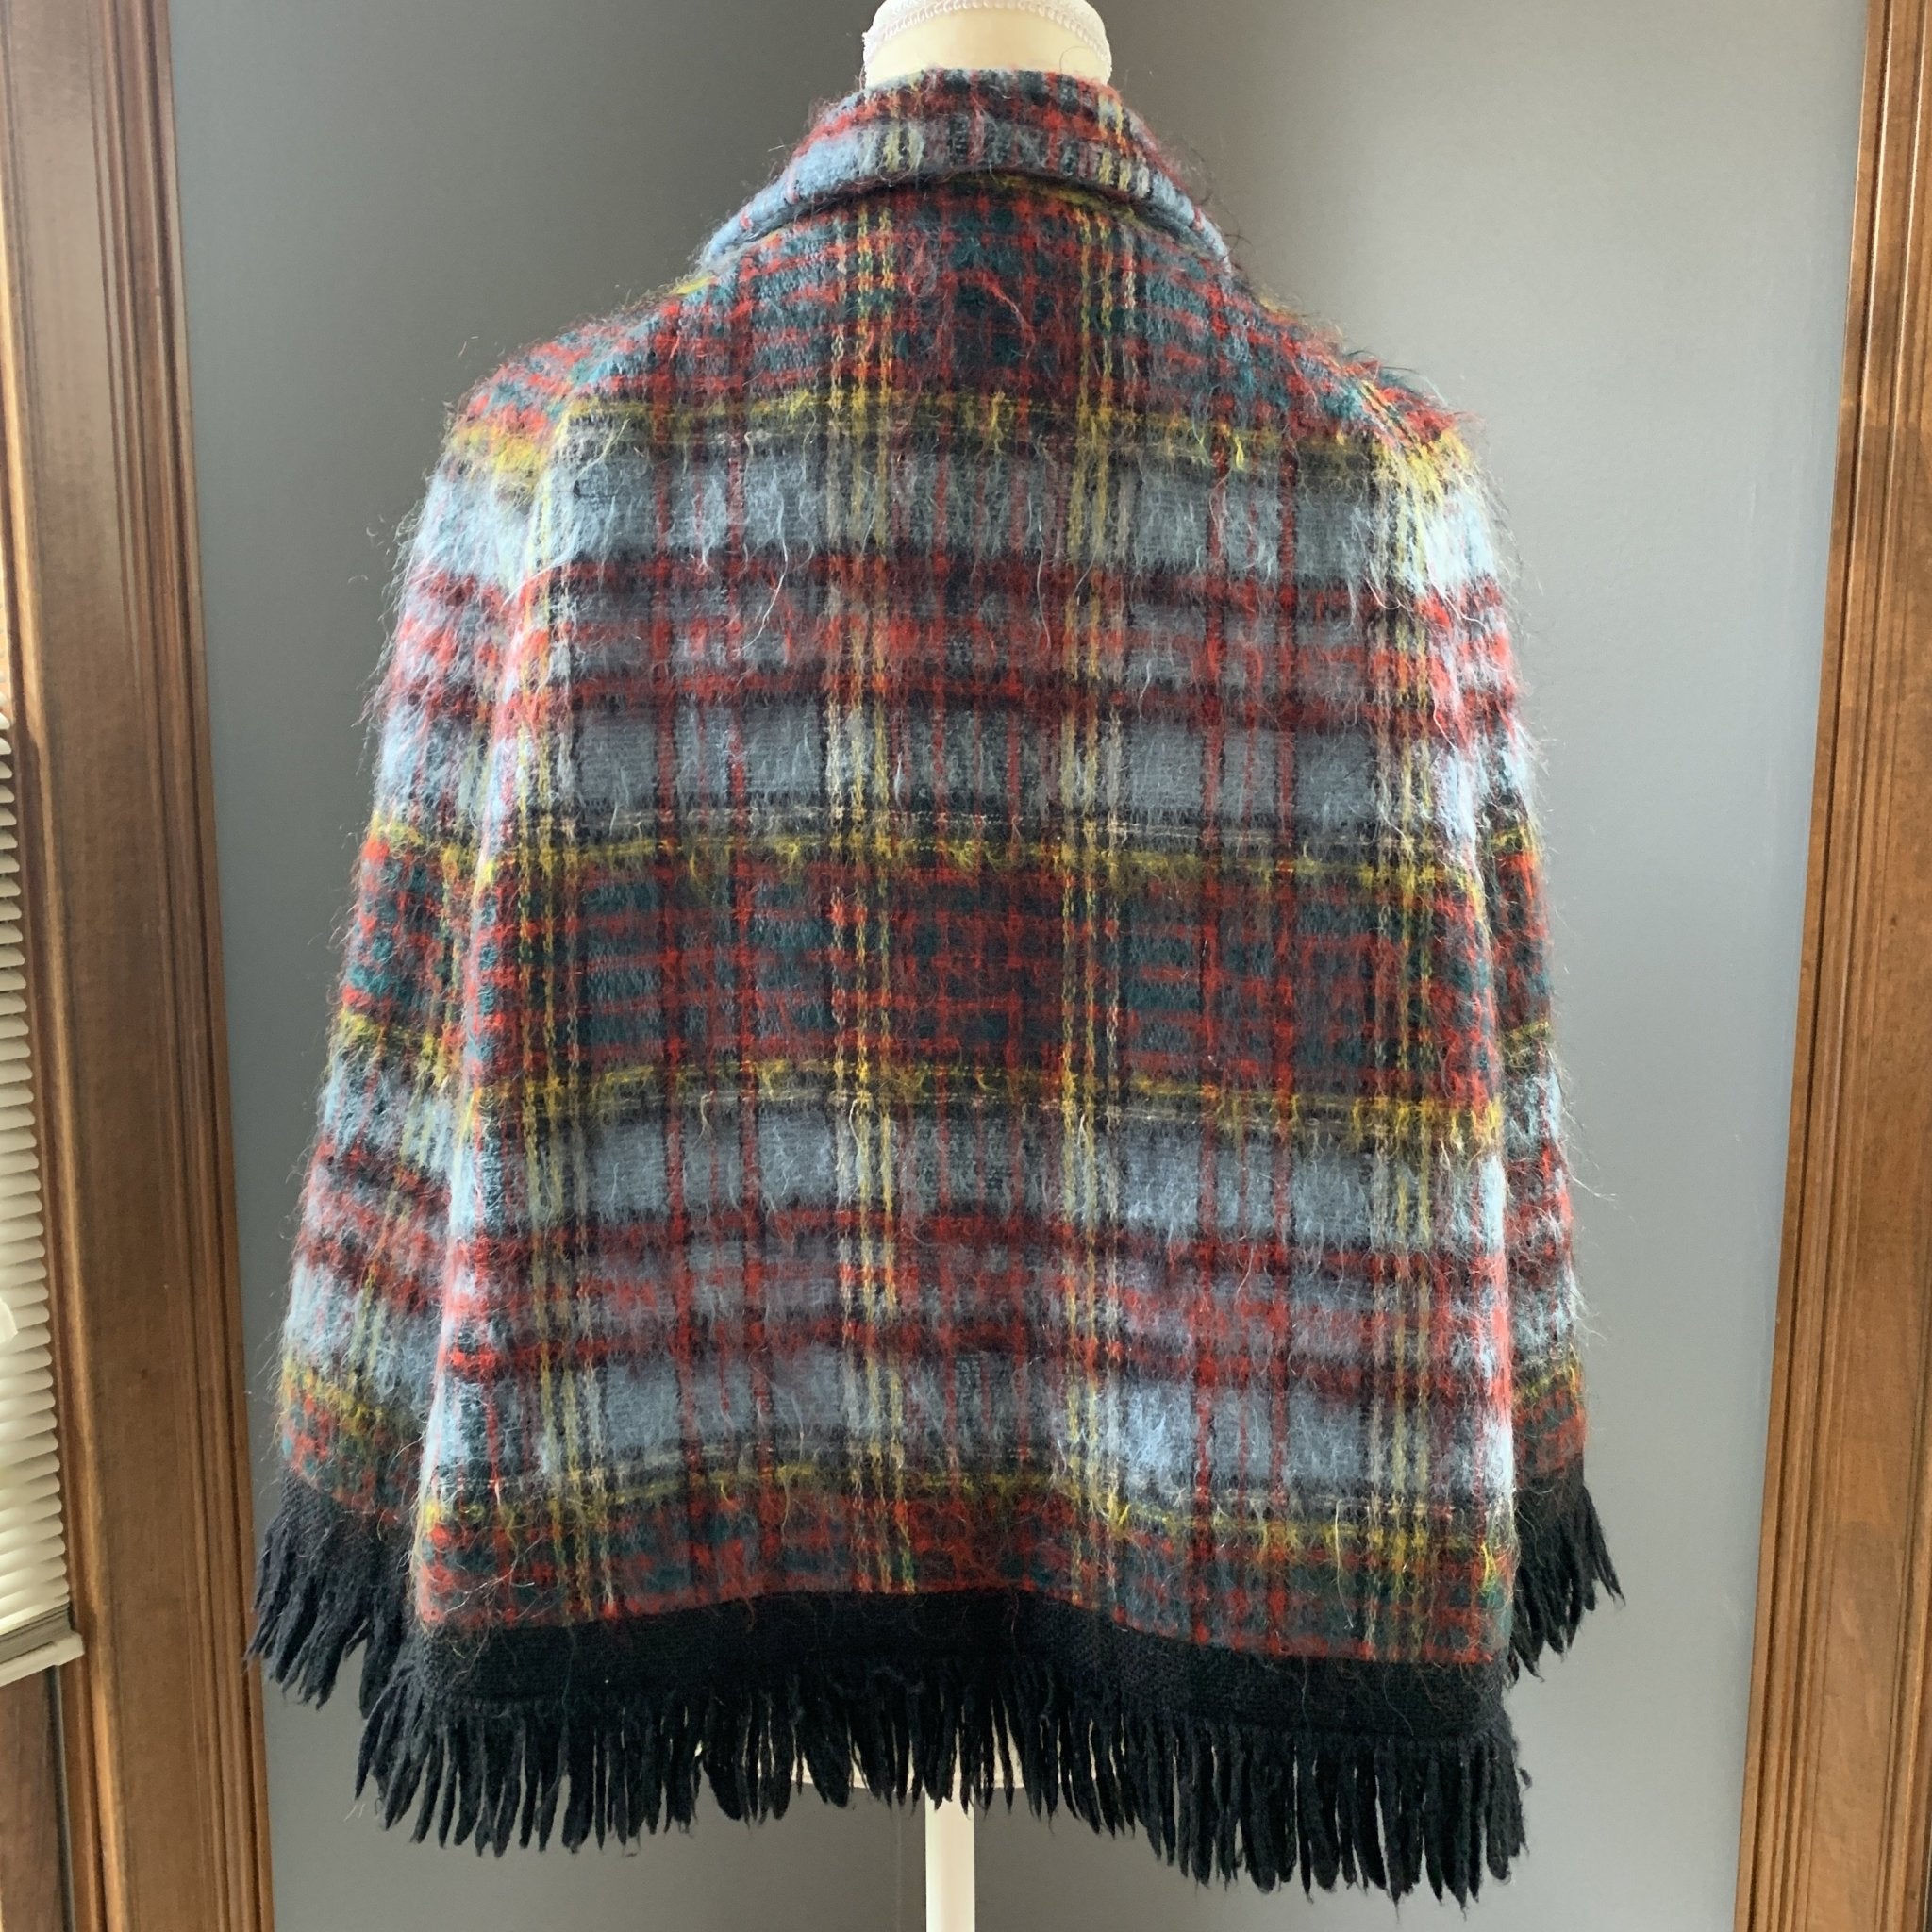 Vintage Mohair Wool Poncho or Jacket in Blue and Red Plaid from Strath